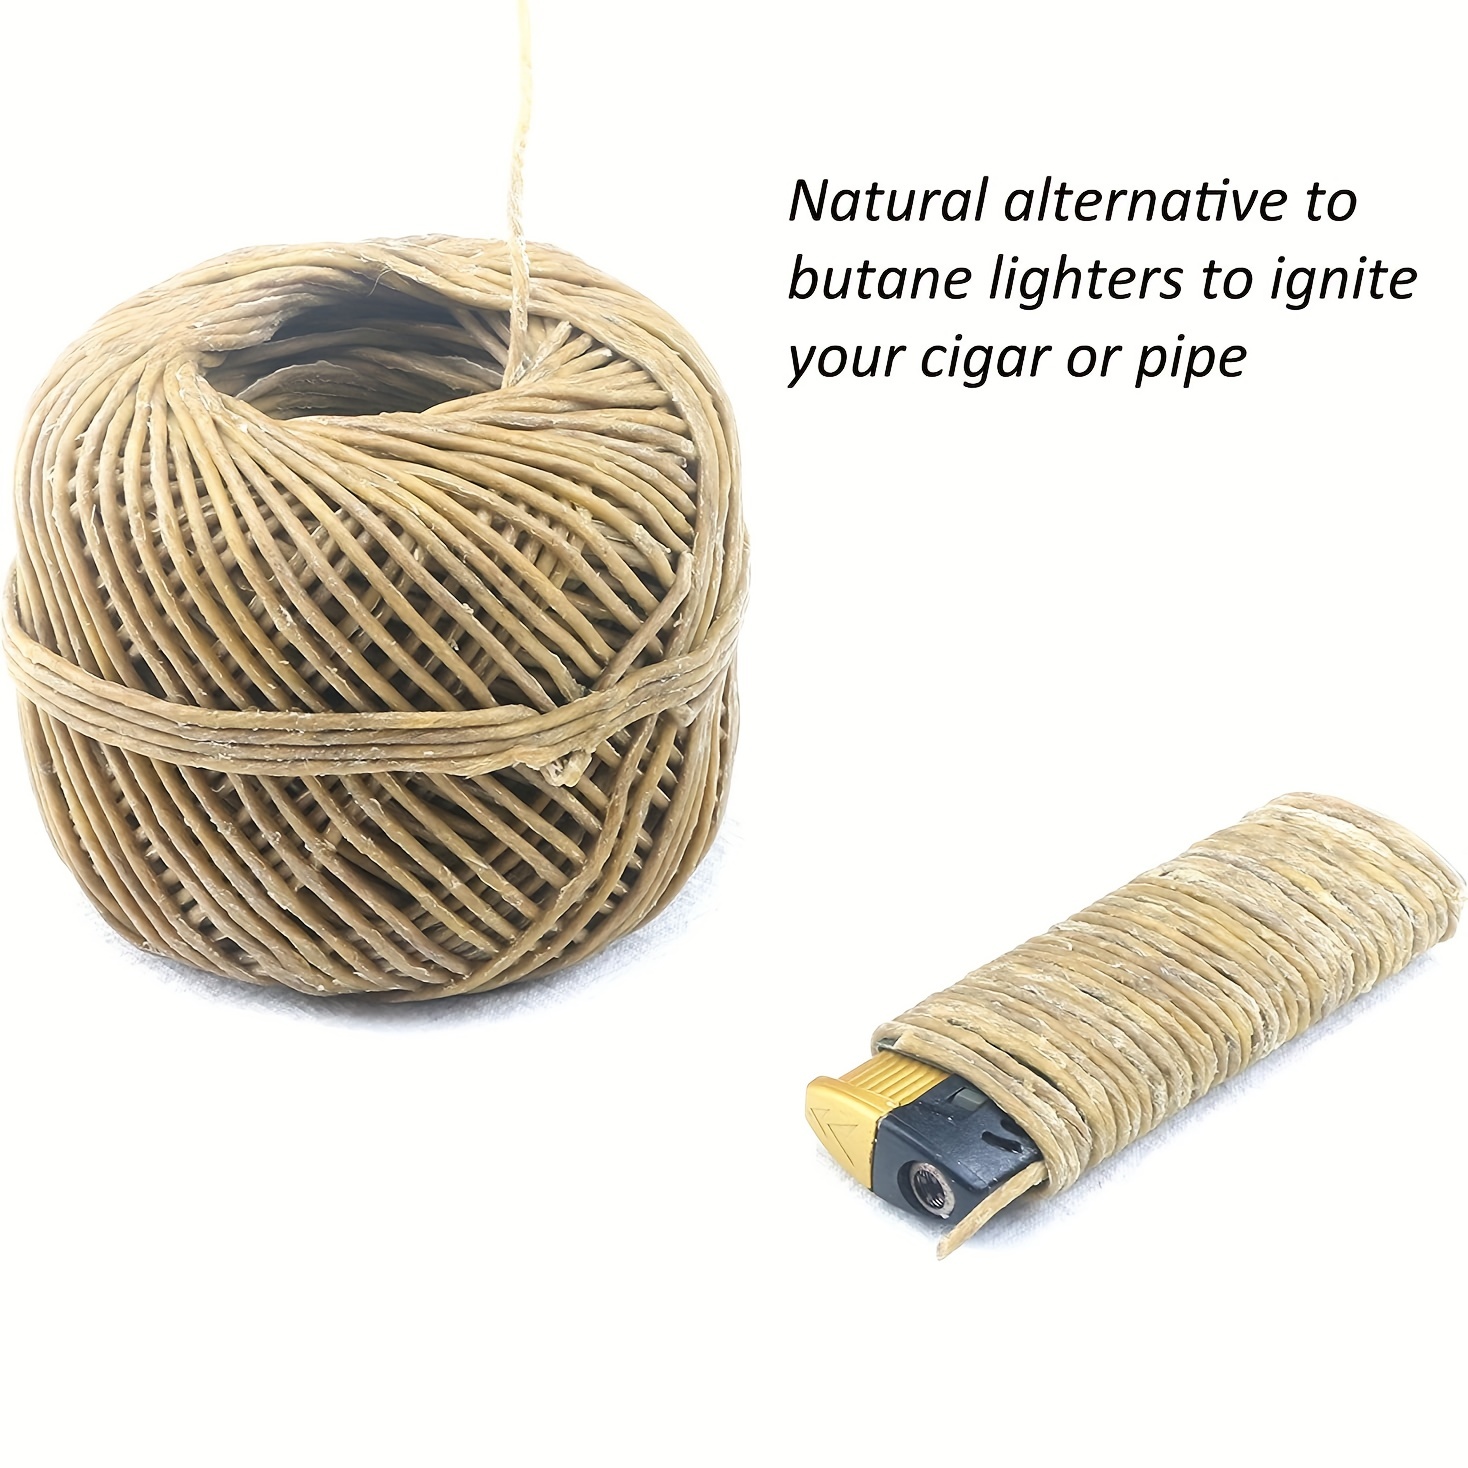 Six (6) 200FT/60M Hemp Wick Rolls With Organic BEESWAX, Great Butane  Replacement & Perfect For DYI Candle Wicks For Candle Making, Slow Burning,  Low Smoke Great For Candle Wicks. (1mm THICK) 